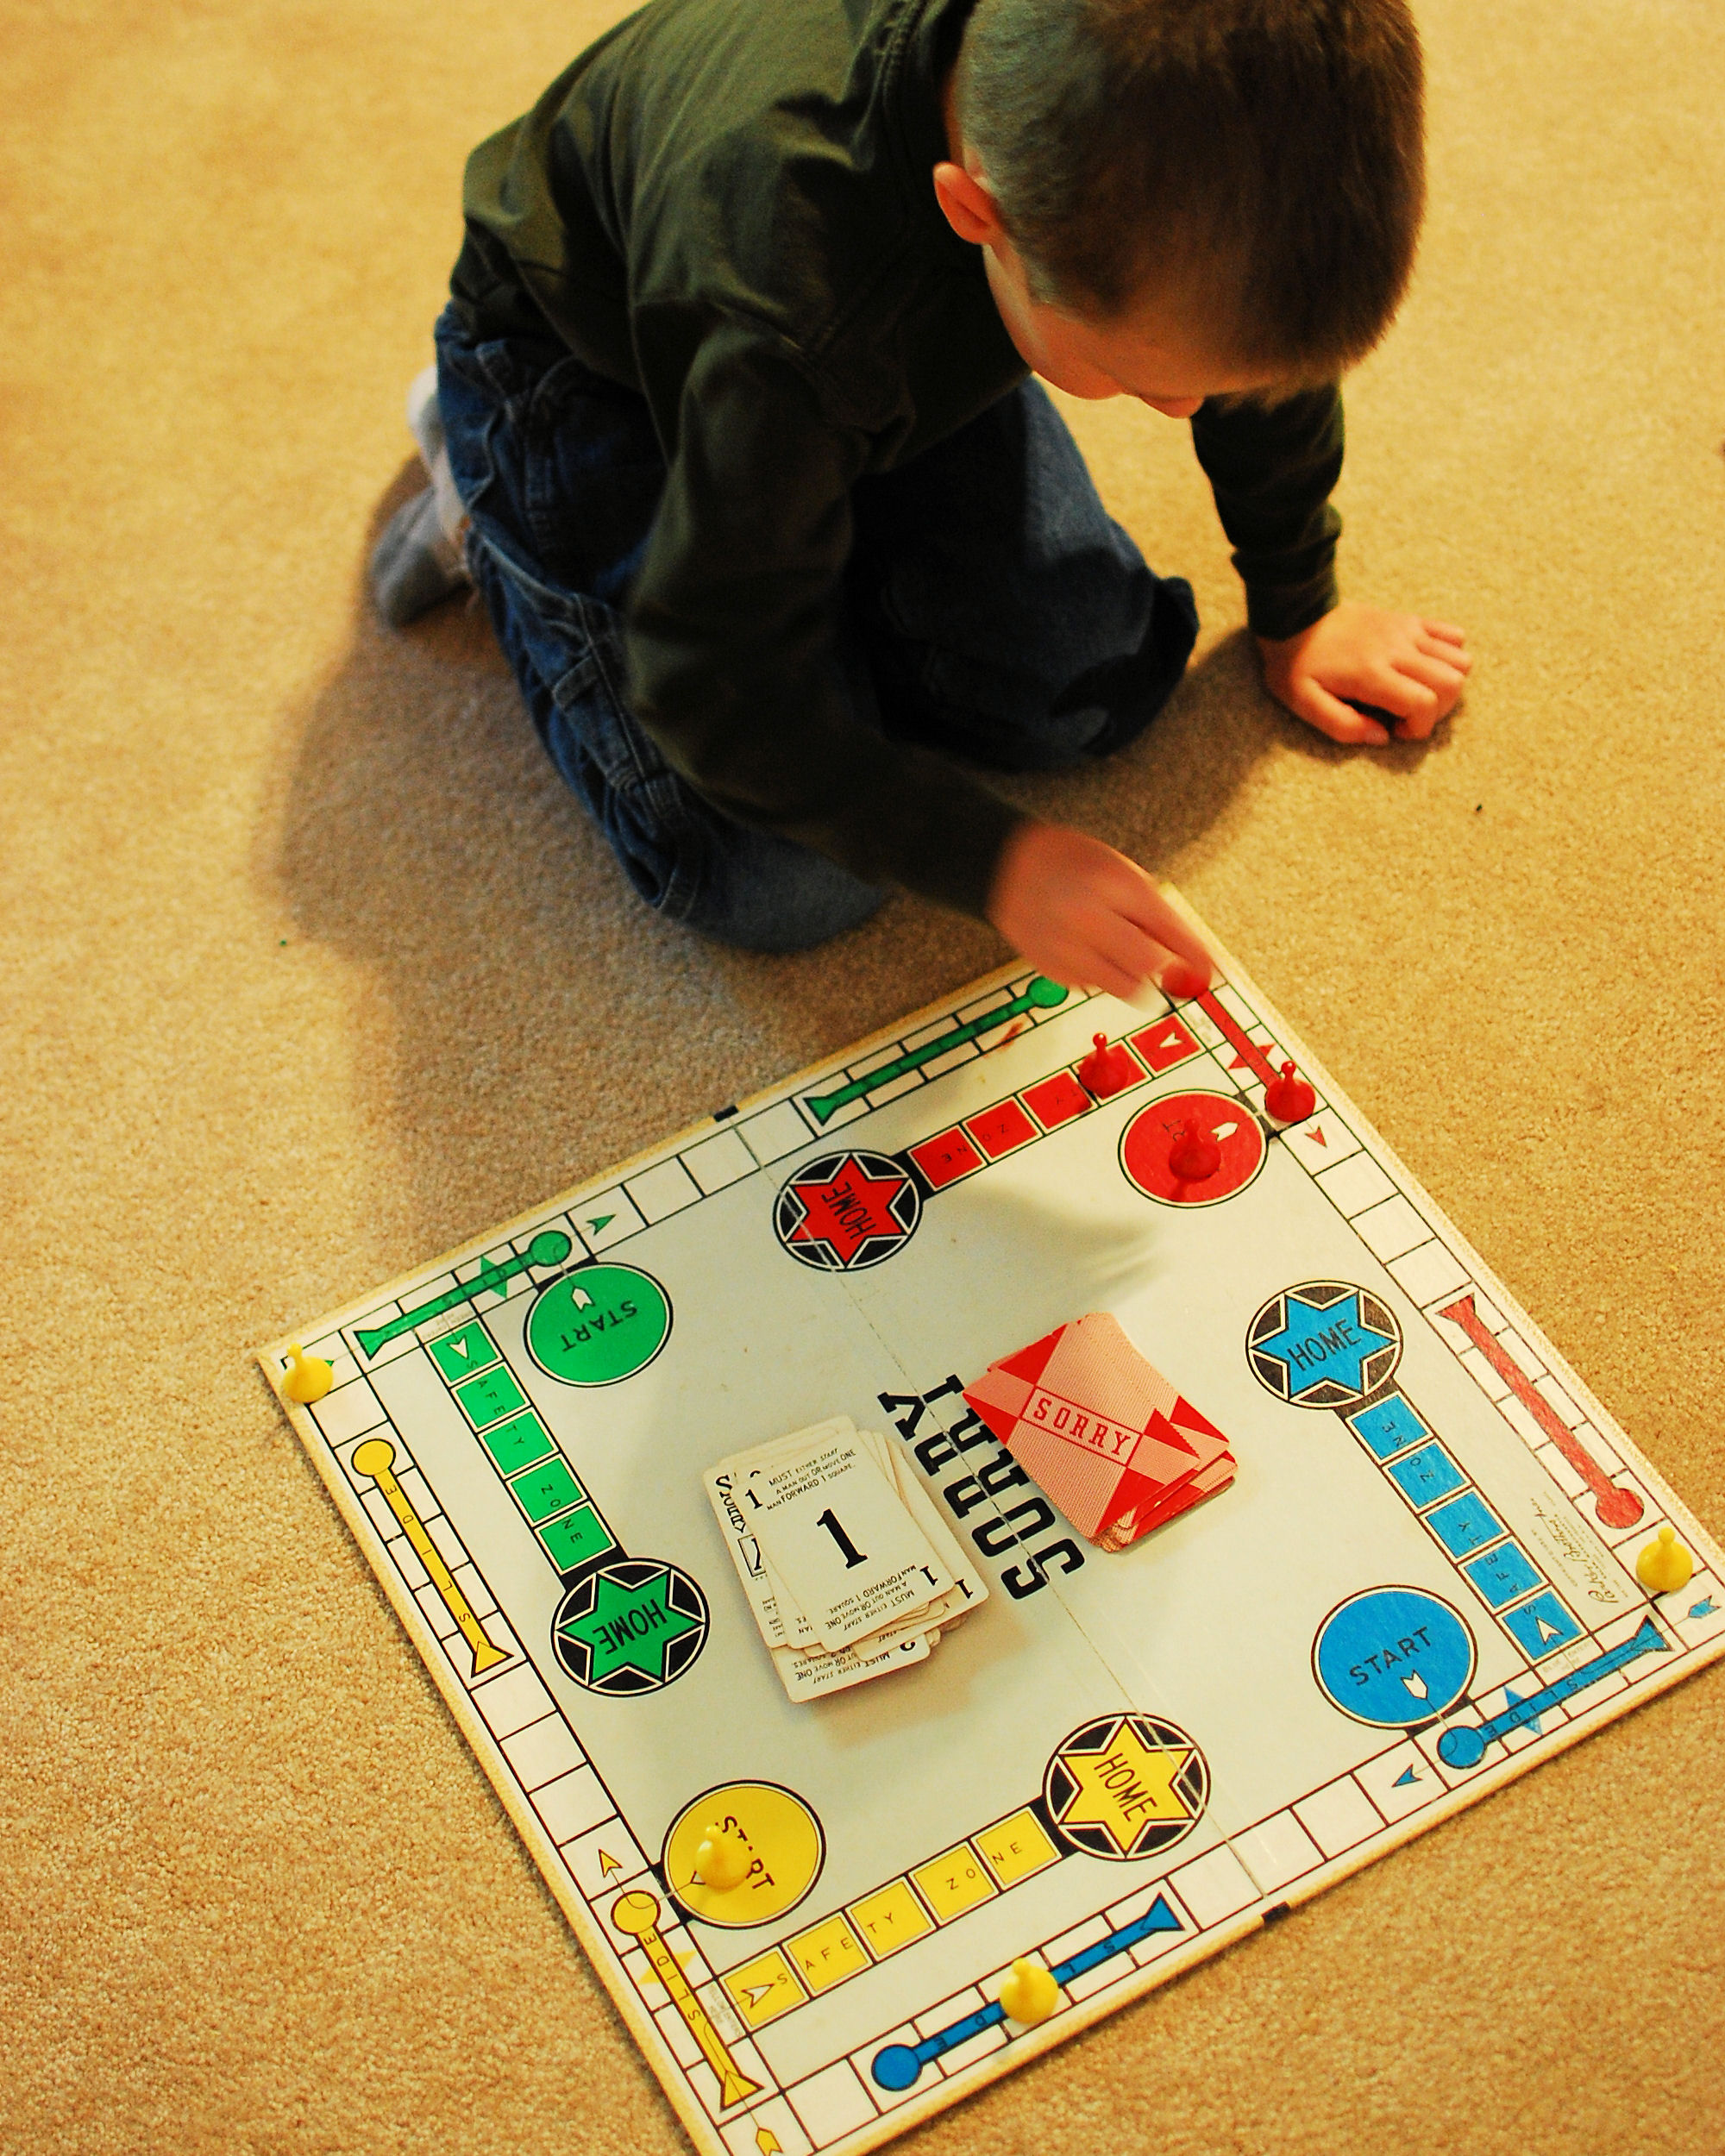 10 Fun Game Ideas for Young Children